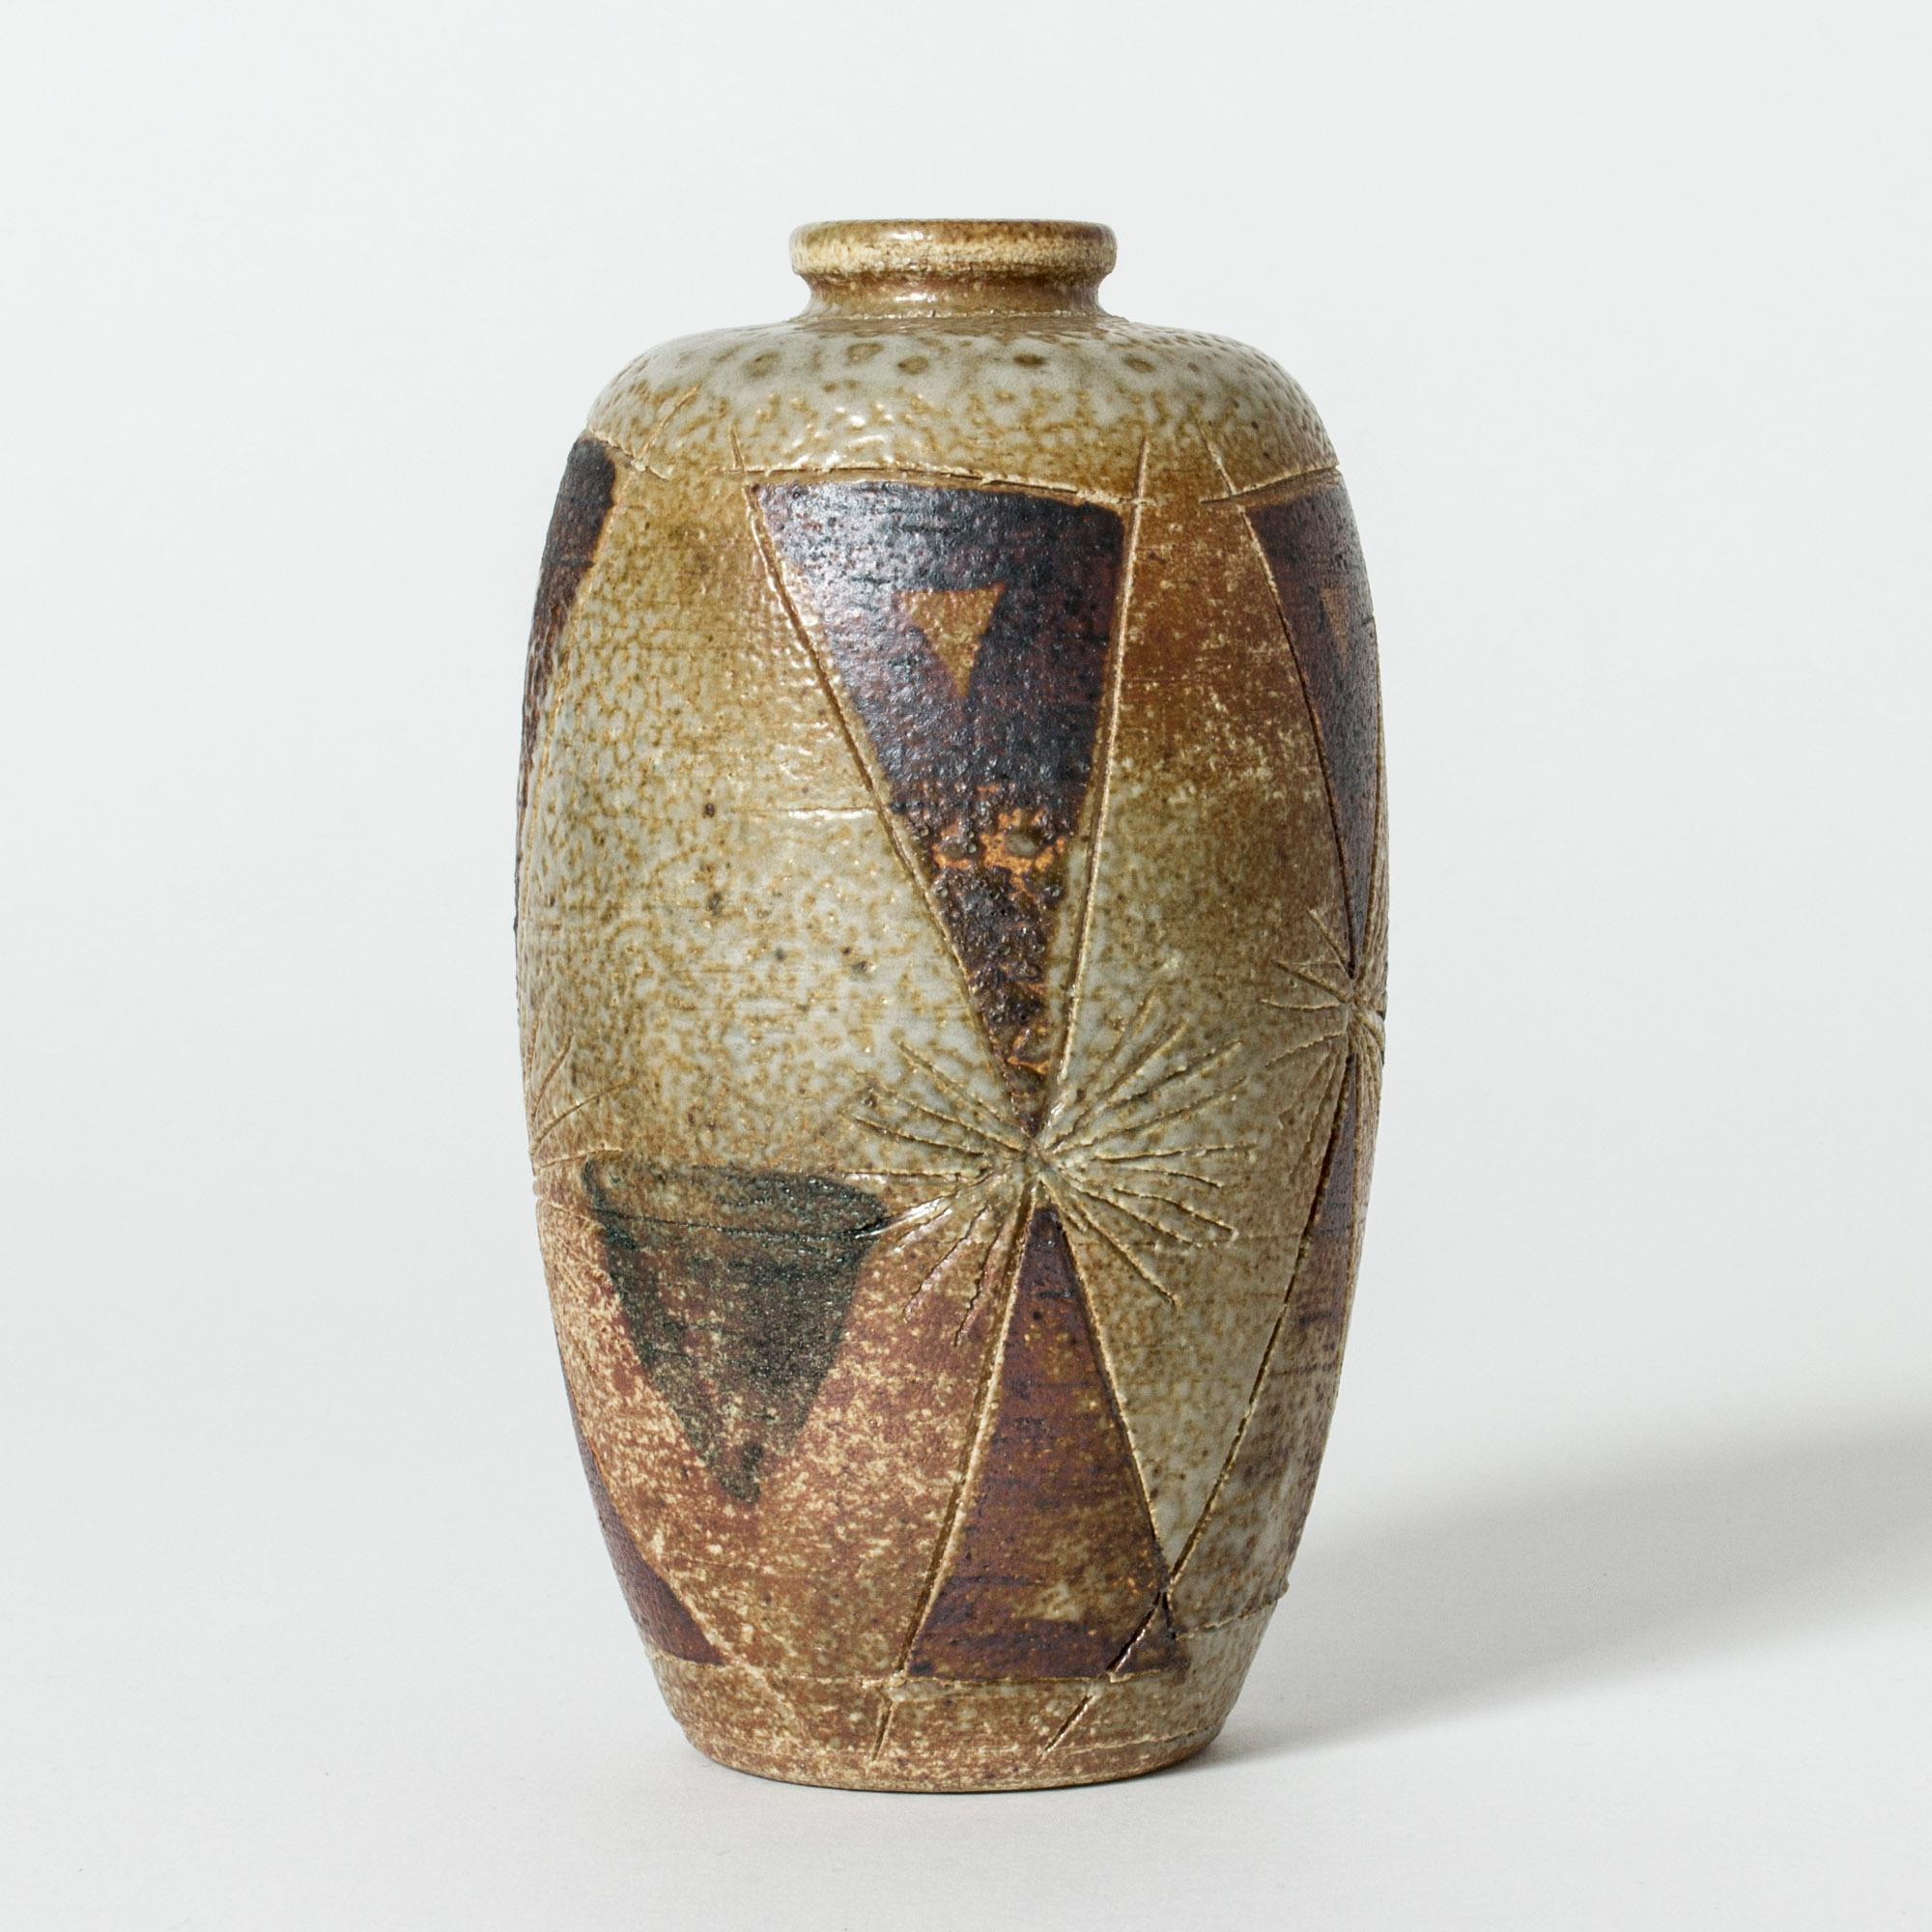 Beautiful stoneware vase by Anders B. Liljefors, in a sleek form with a structured surface. Decor of etched stars and symbols that give the vase a mystical expression.

Anders B. Liljefors was a Swedish ceramicist, sculptor and painter. He spent a